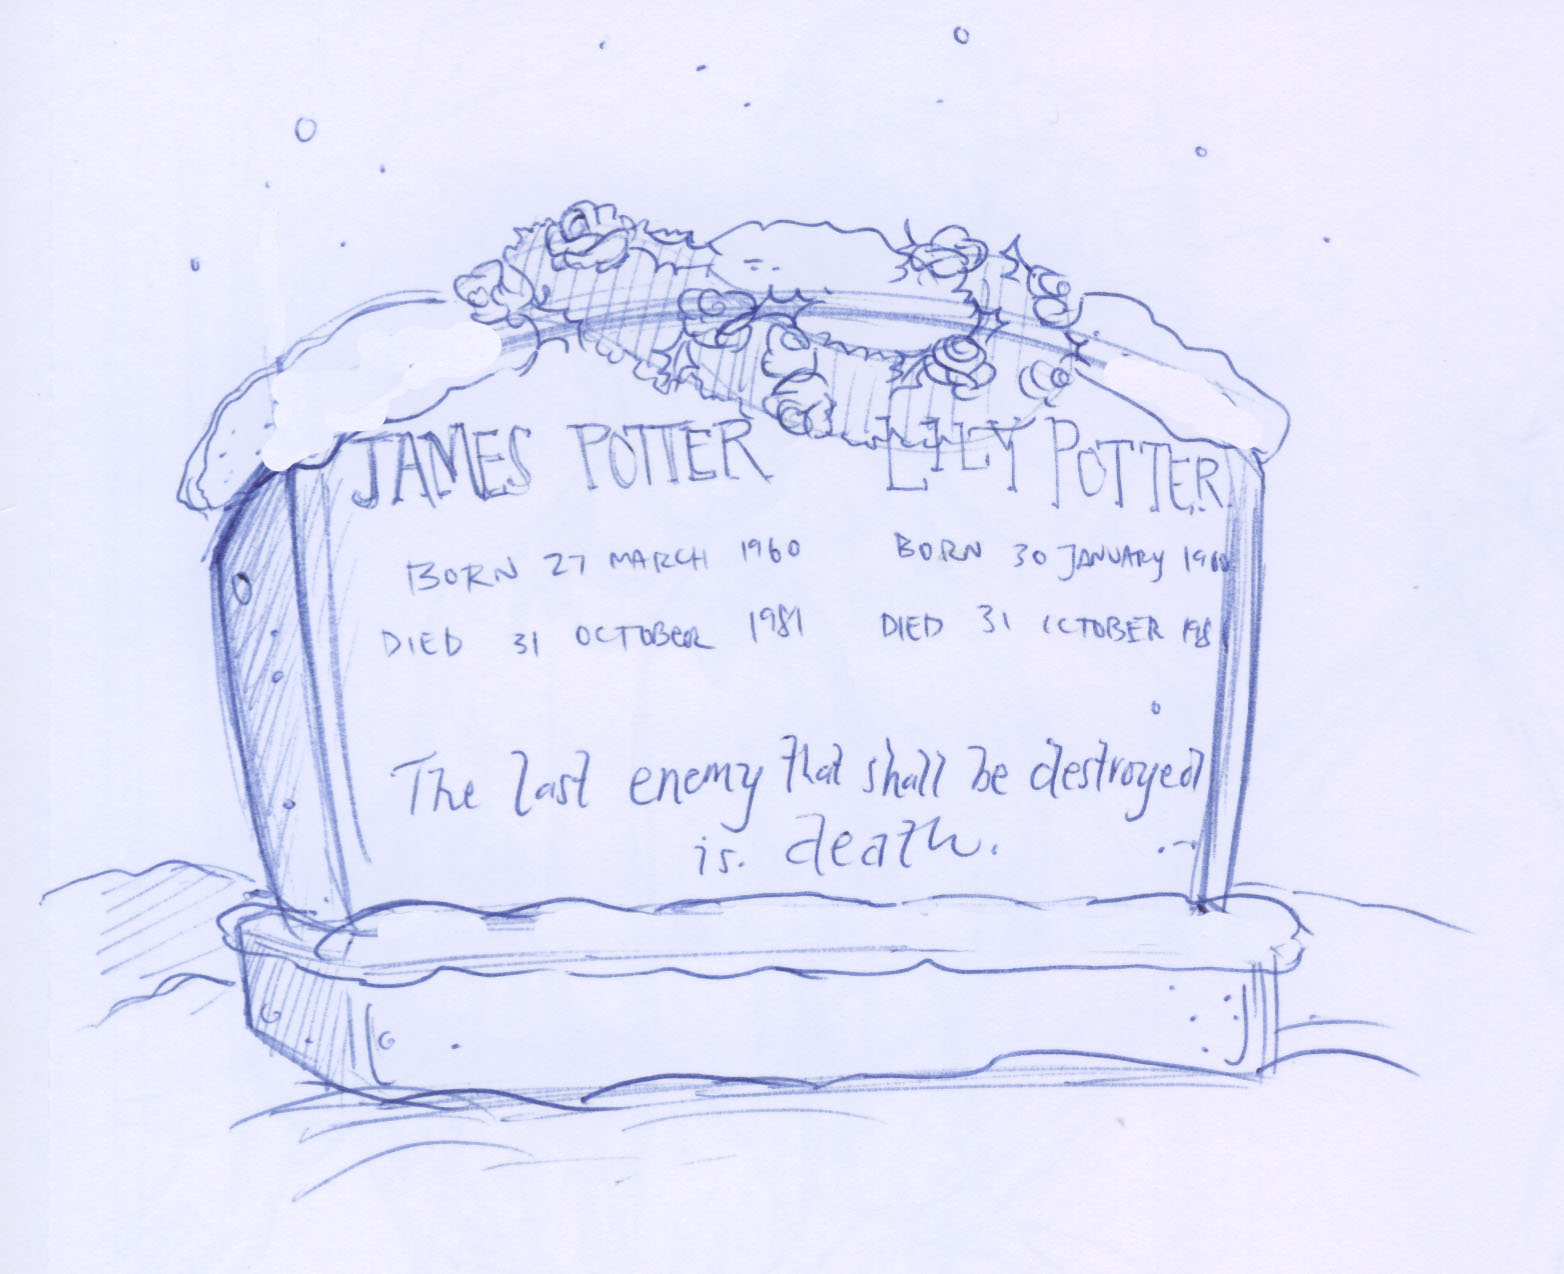 Harry and Hermione leave a wreath of Christmas roses on the grave of James and Lily Potter.